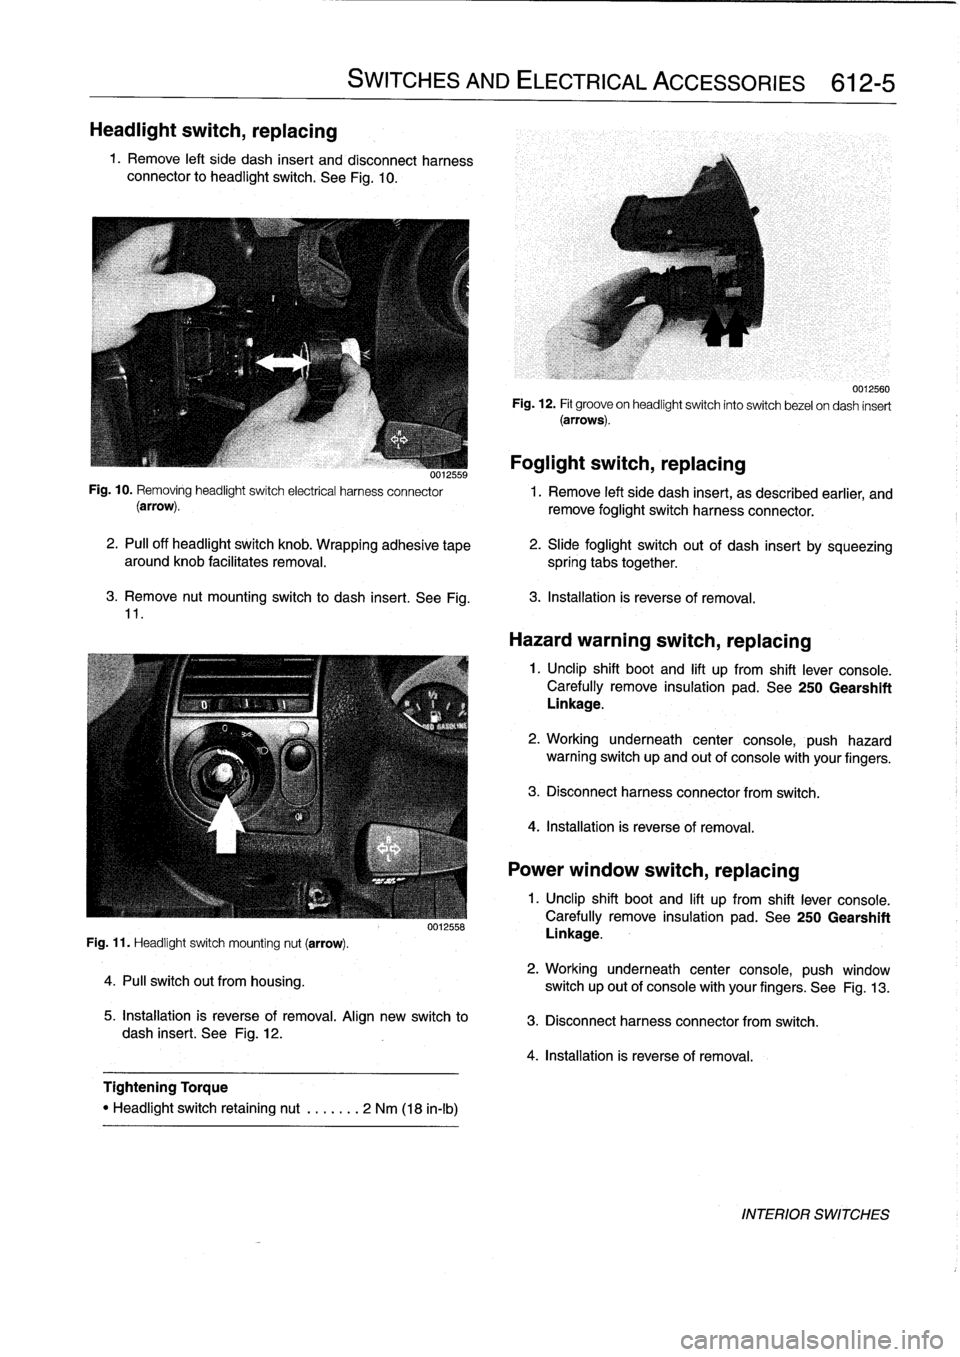 BMW 325i 1996 E36 Owners Manual 
Headlight
switch,
replacing

1
.
Remove
left
side
dash
insert
and
disconnect
harness
connector
to
headlight
switch
.
See
Fig
.
10
.

3
.
Remove
nut
mounting
switch
to
dash
insert
.
See
Fig
.
11
.

Fi